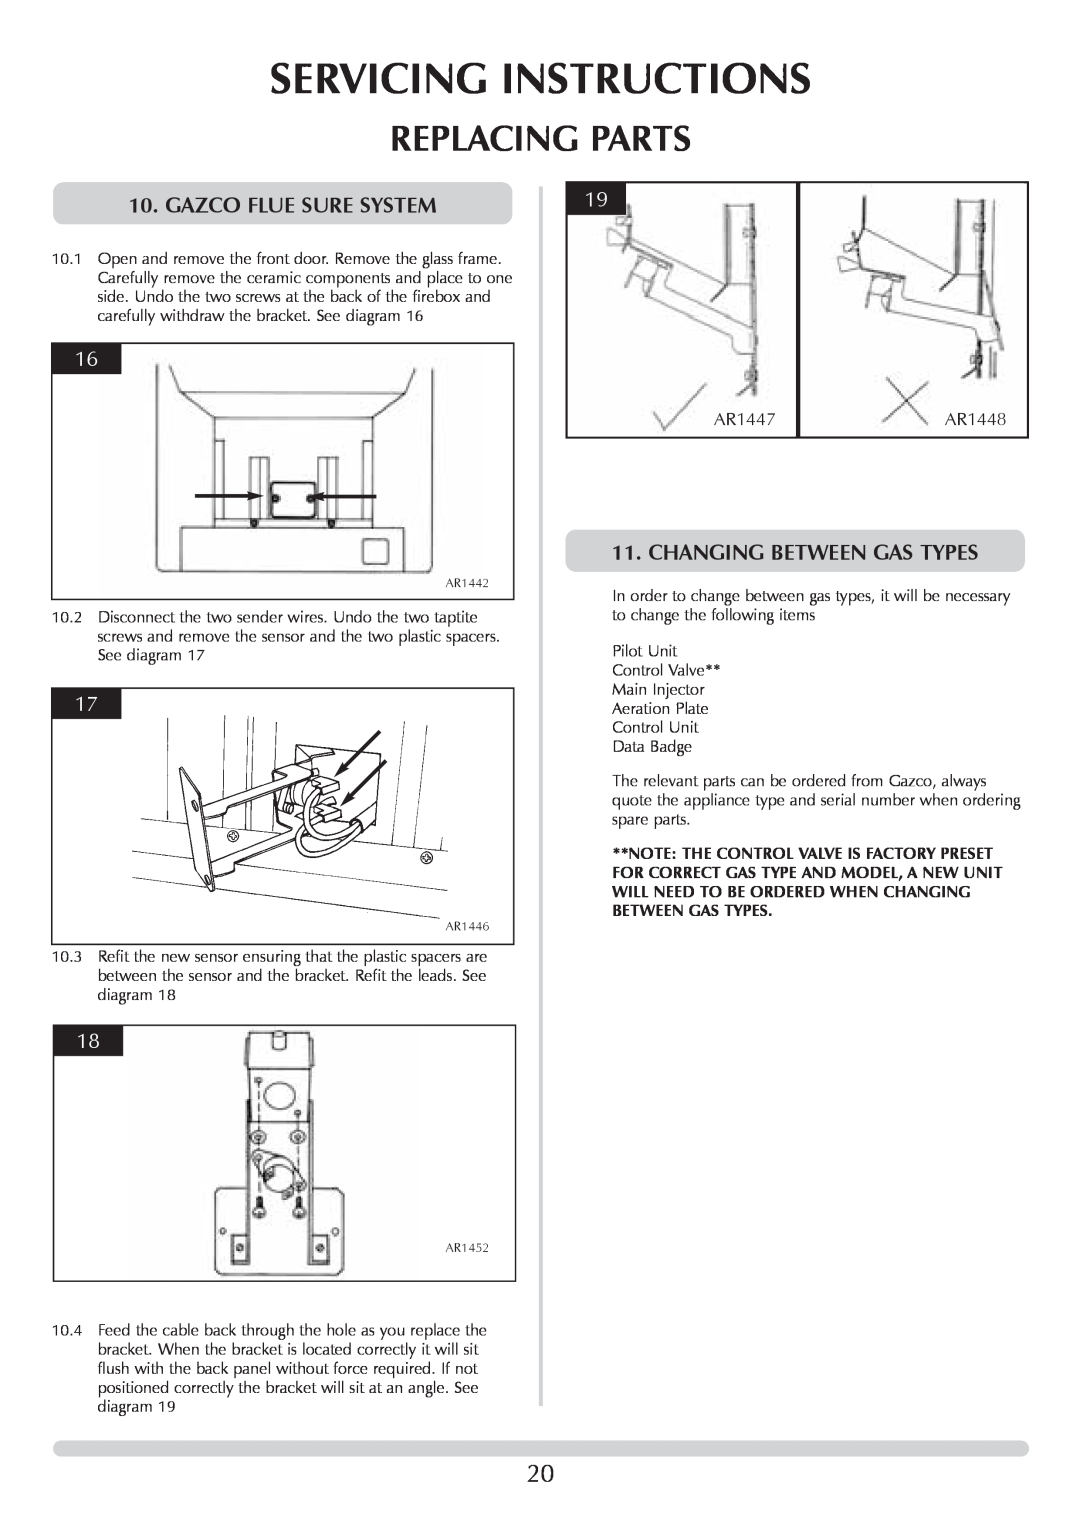 Stovax F40 manual Gazco Flue Sure System, Changing Between Gas Types, Servicing Instructions, Replacing Parts, AR1447 